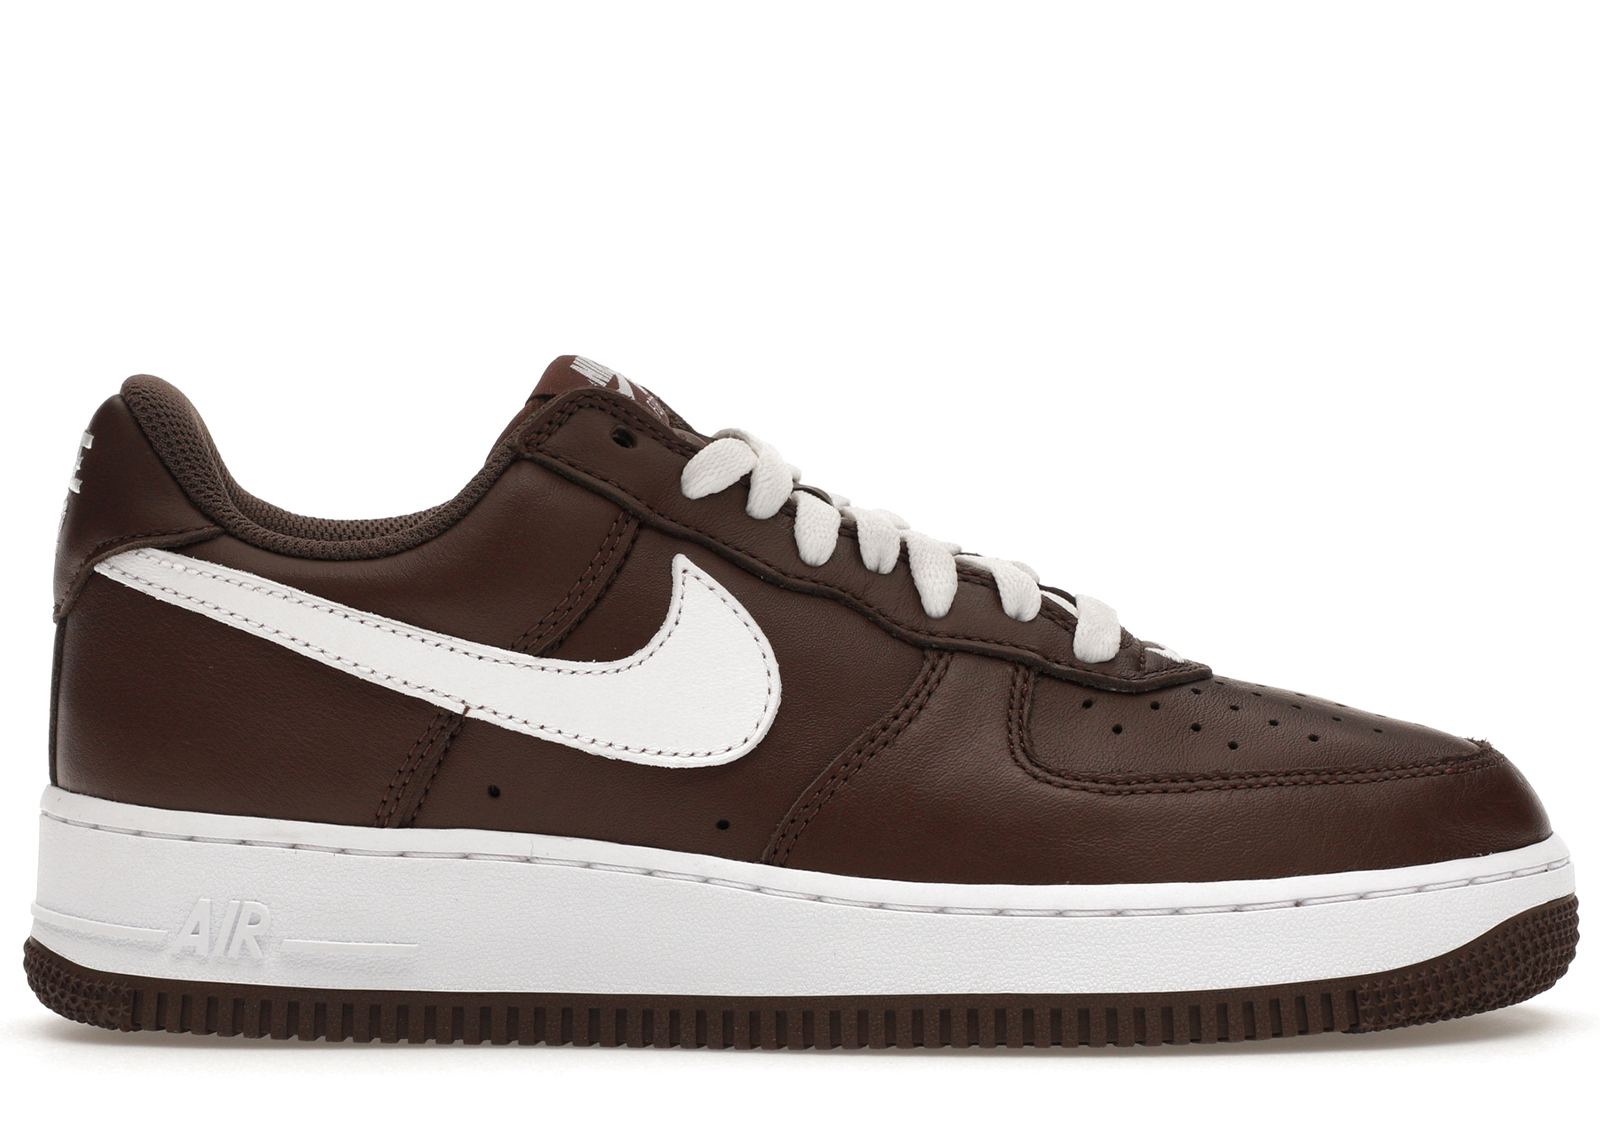 Nike Air Force 1 Low Retro Color of the Month Chocolate メンズ ...